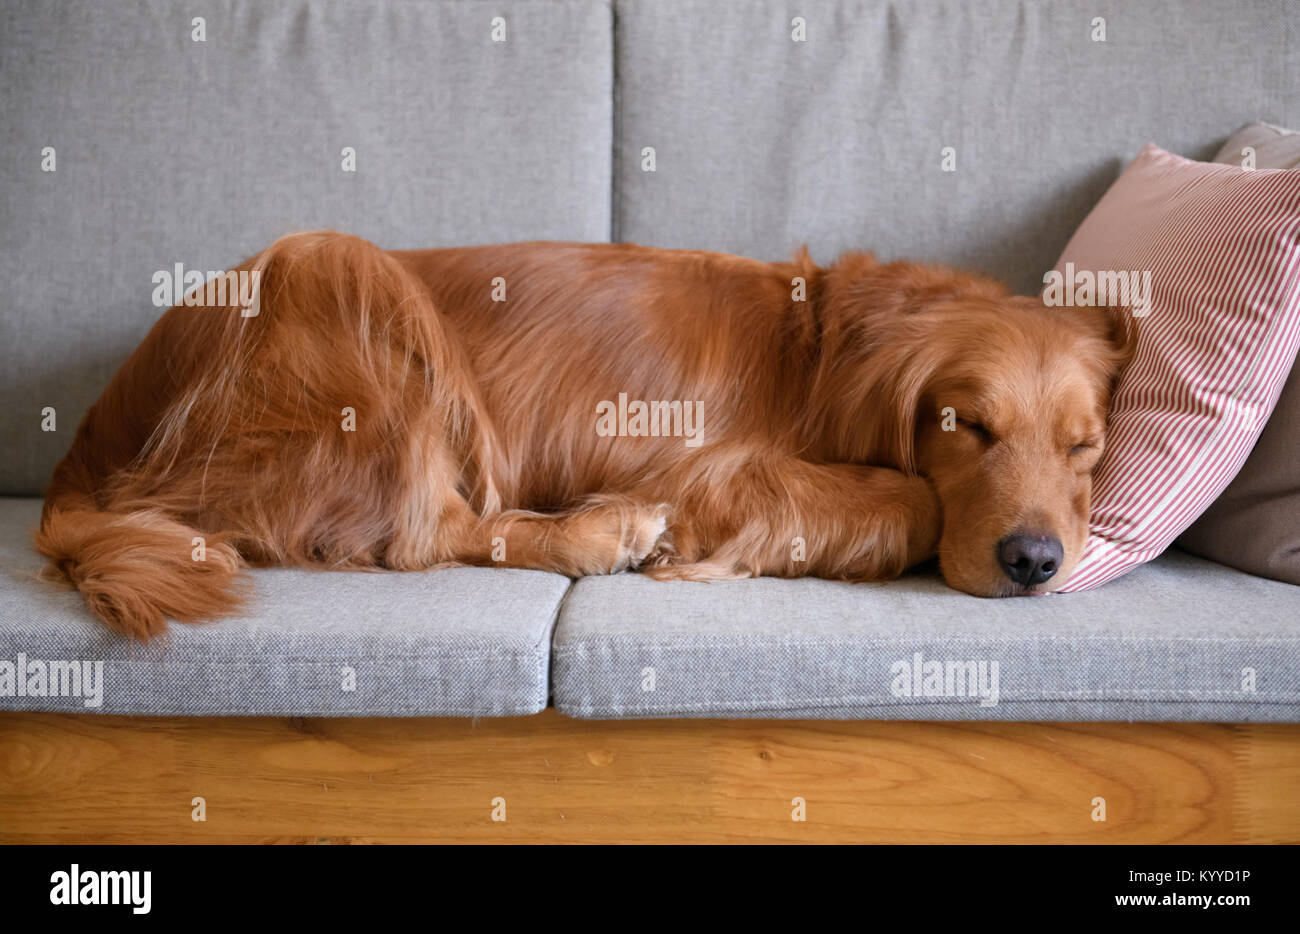 Golden retriever sleeping on the couch Stock Photo